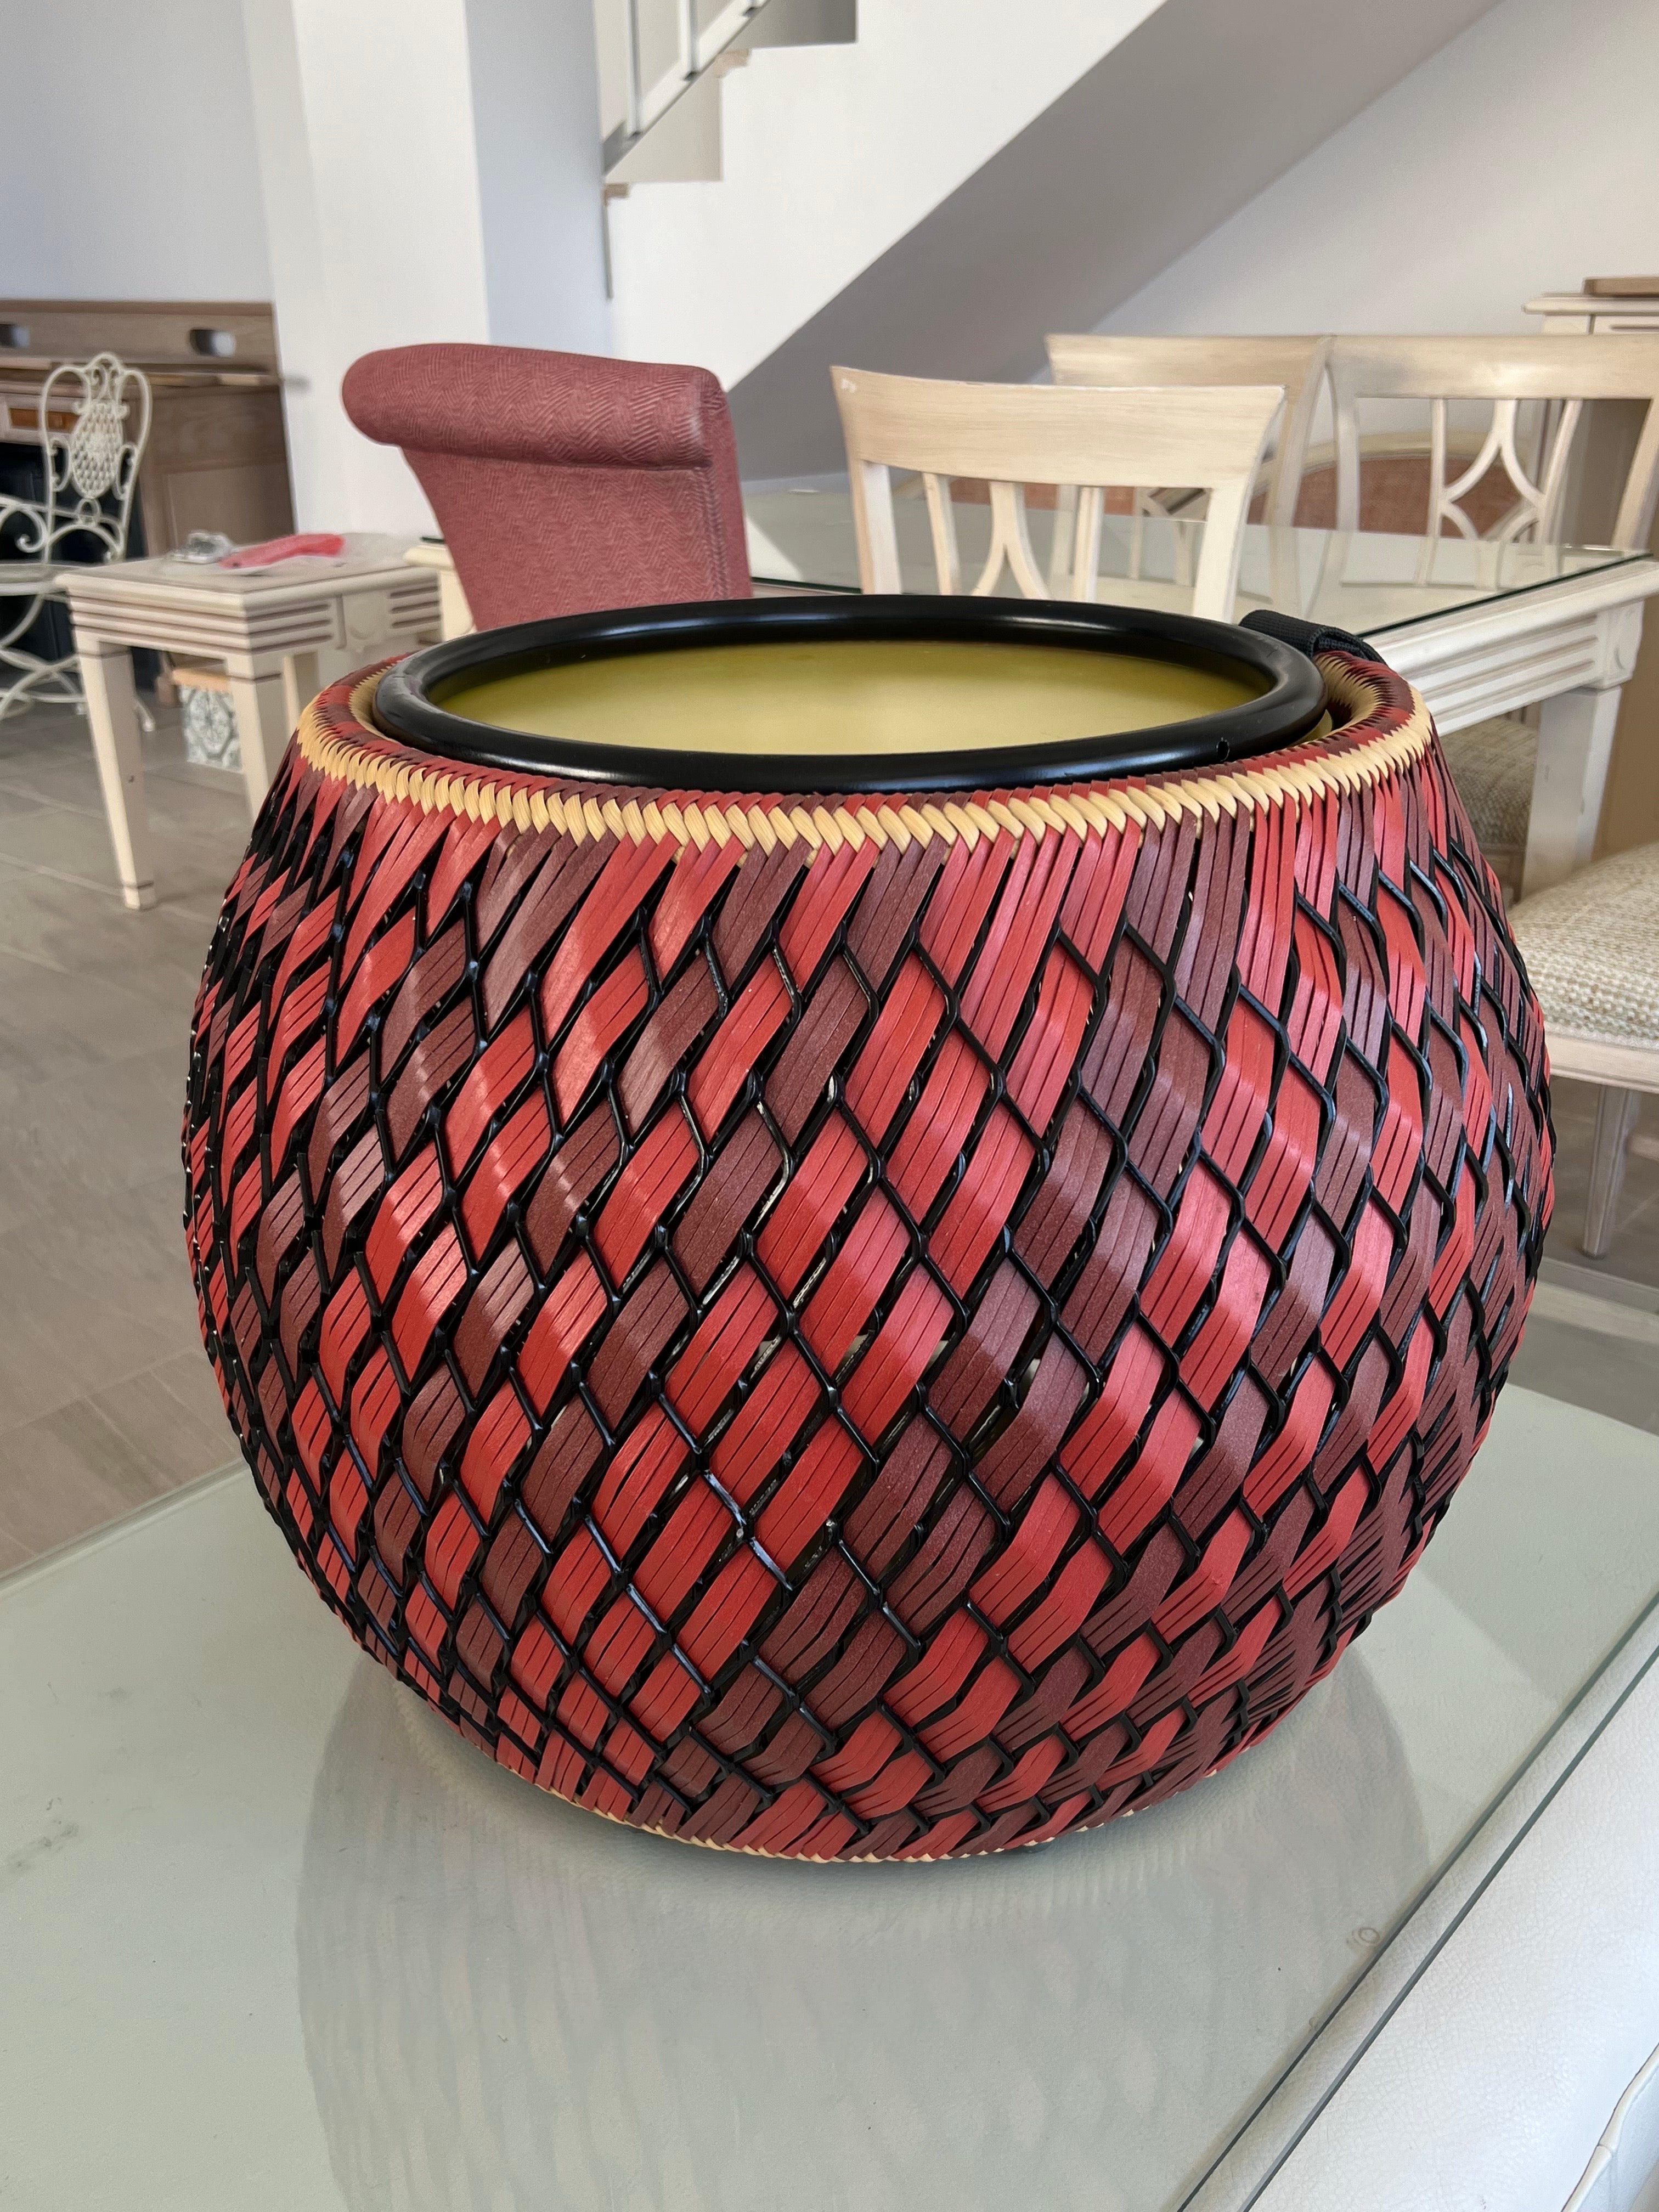 21st Century German Dala red round table by Dedon designed by Stephen Burks. The frame is electrostatic powder-coated aluminium. Fiber is High-Density Polyethylene (HDPE). Tabletop is lacquered green glass and it is
the same diameter as the DALA